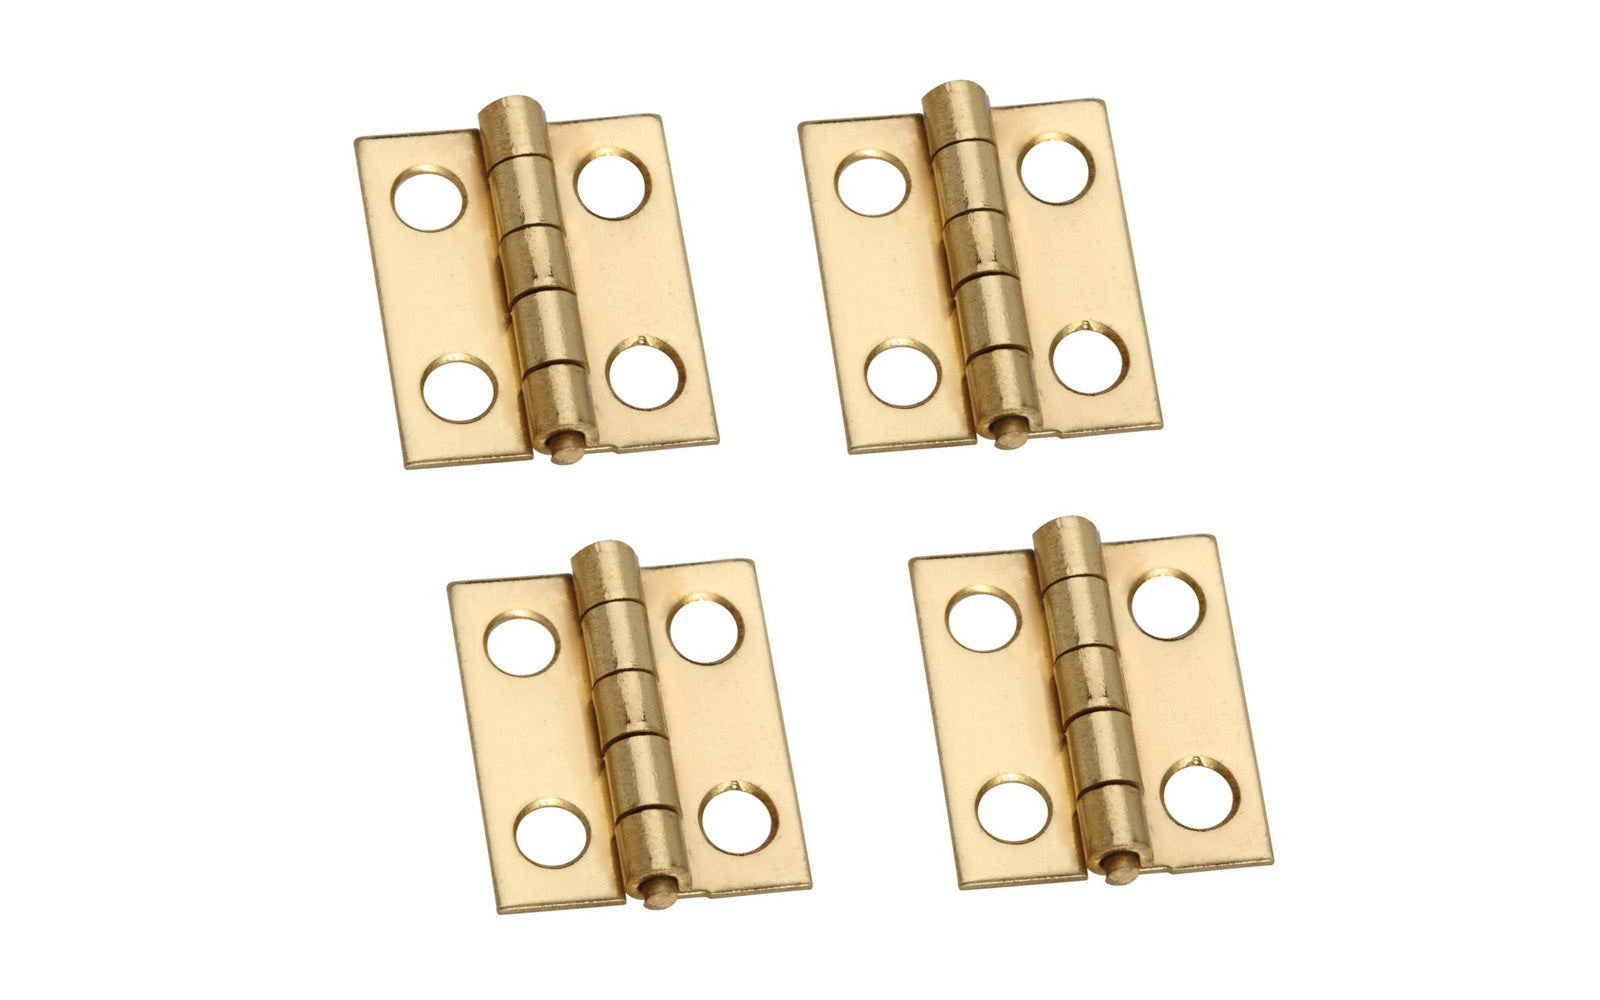 These miniature hinges are designed to add a decorative appearance to small chests, jewelry boxes, craft projects, etc. Made of solid brass material with a lacquered finish. 3/4